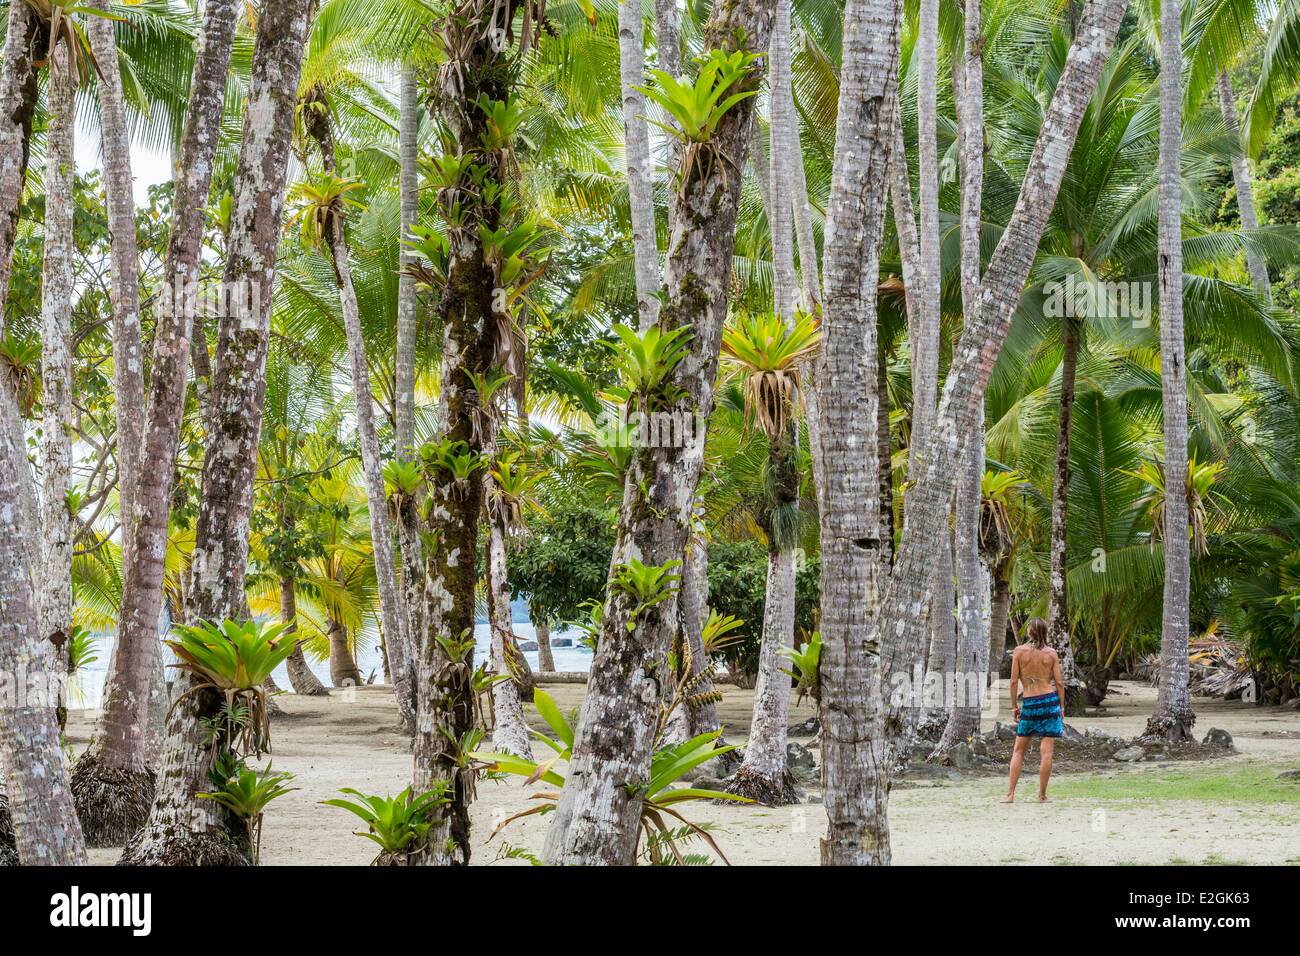 Panama Veraguas province Gulf of Chiriqui National Park of Coiba listed as World Heritage by UNESCO since 2005 Rancheria island palm beach Stock Photo